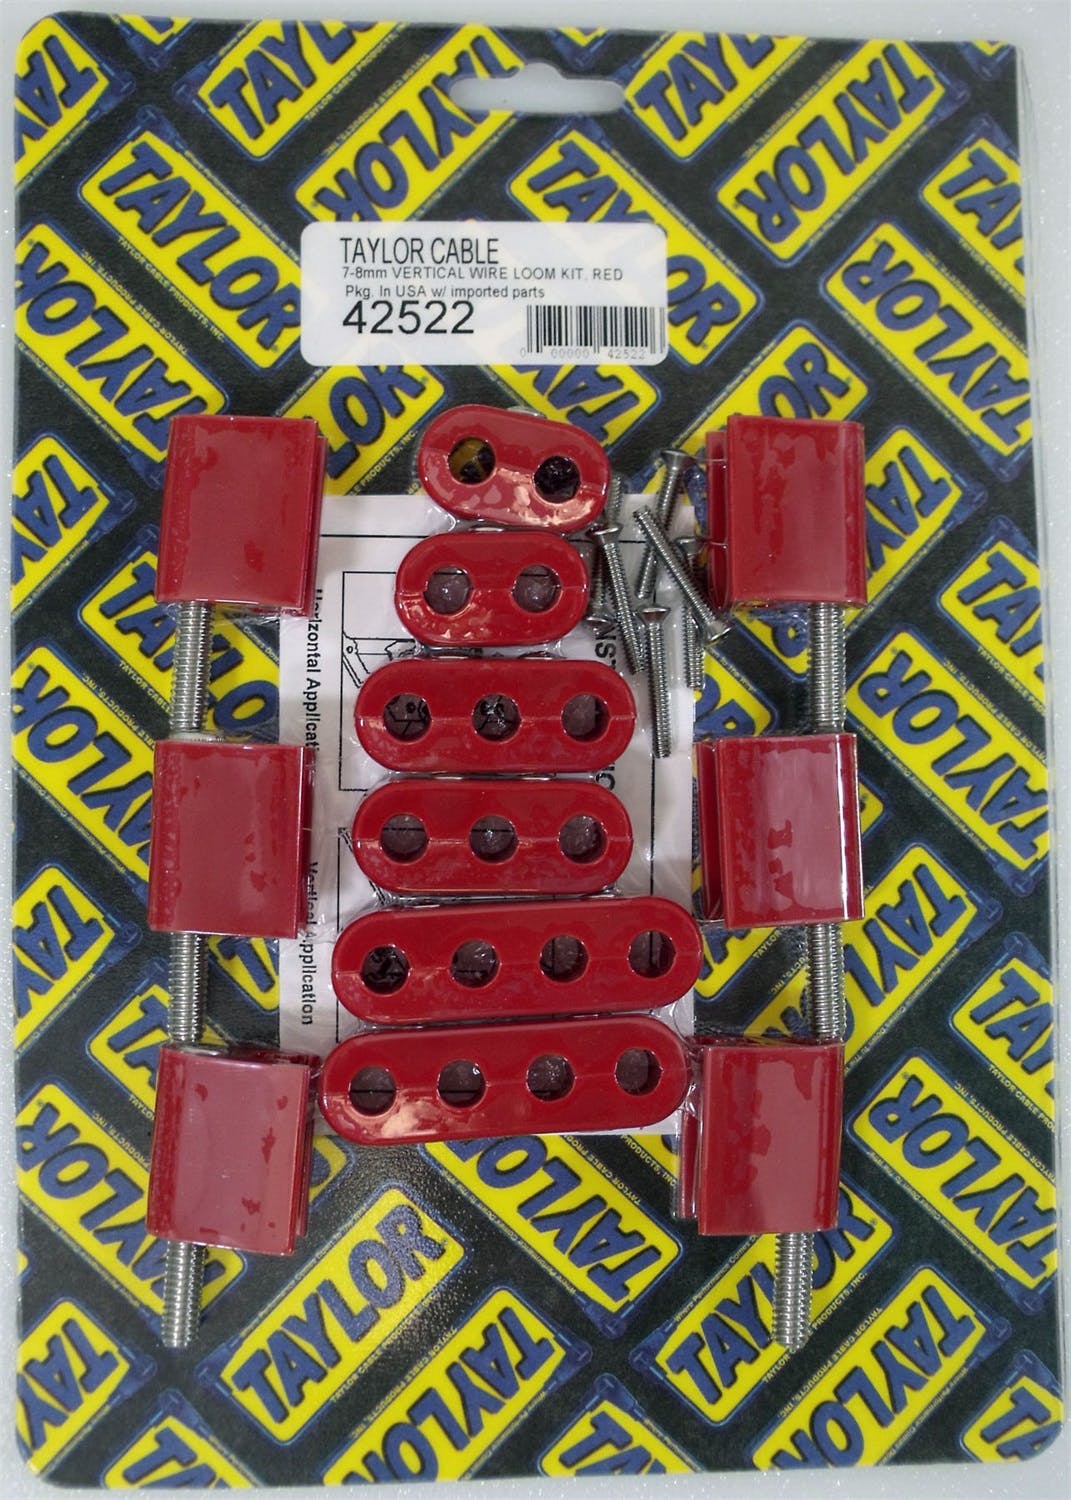 Taylor Cable Products 42522 7-8mm Vertical Wire Loom Kit red